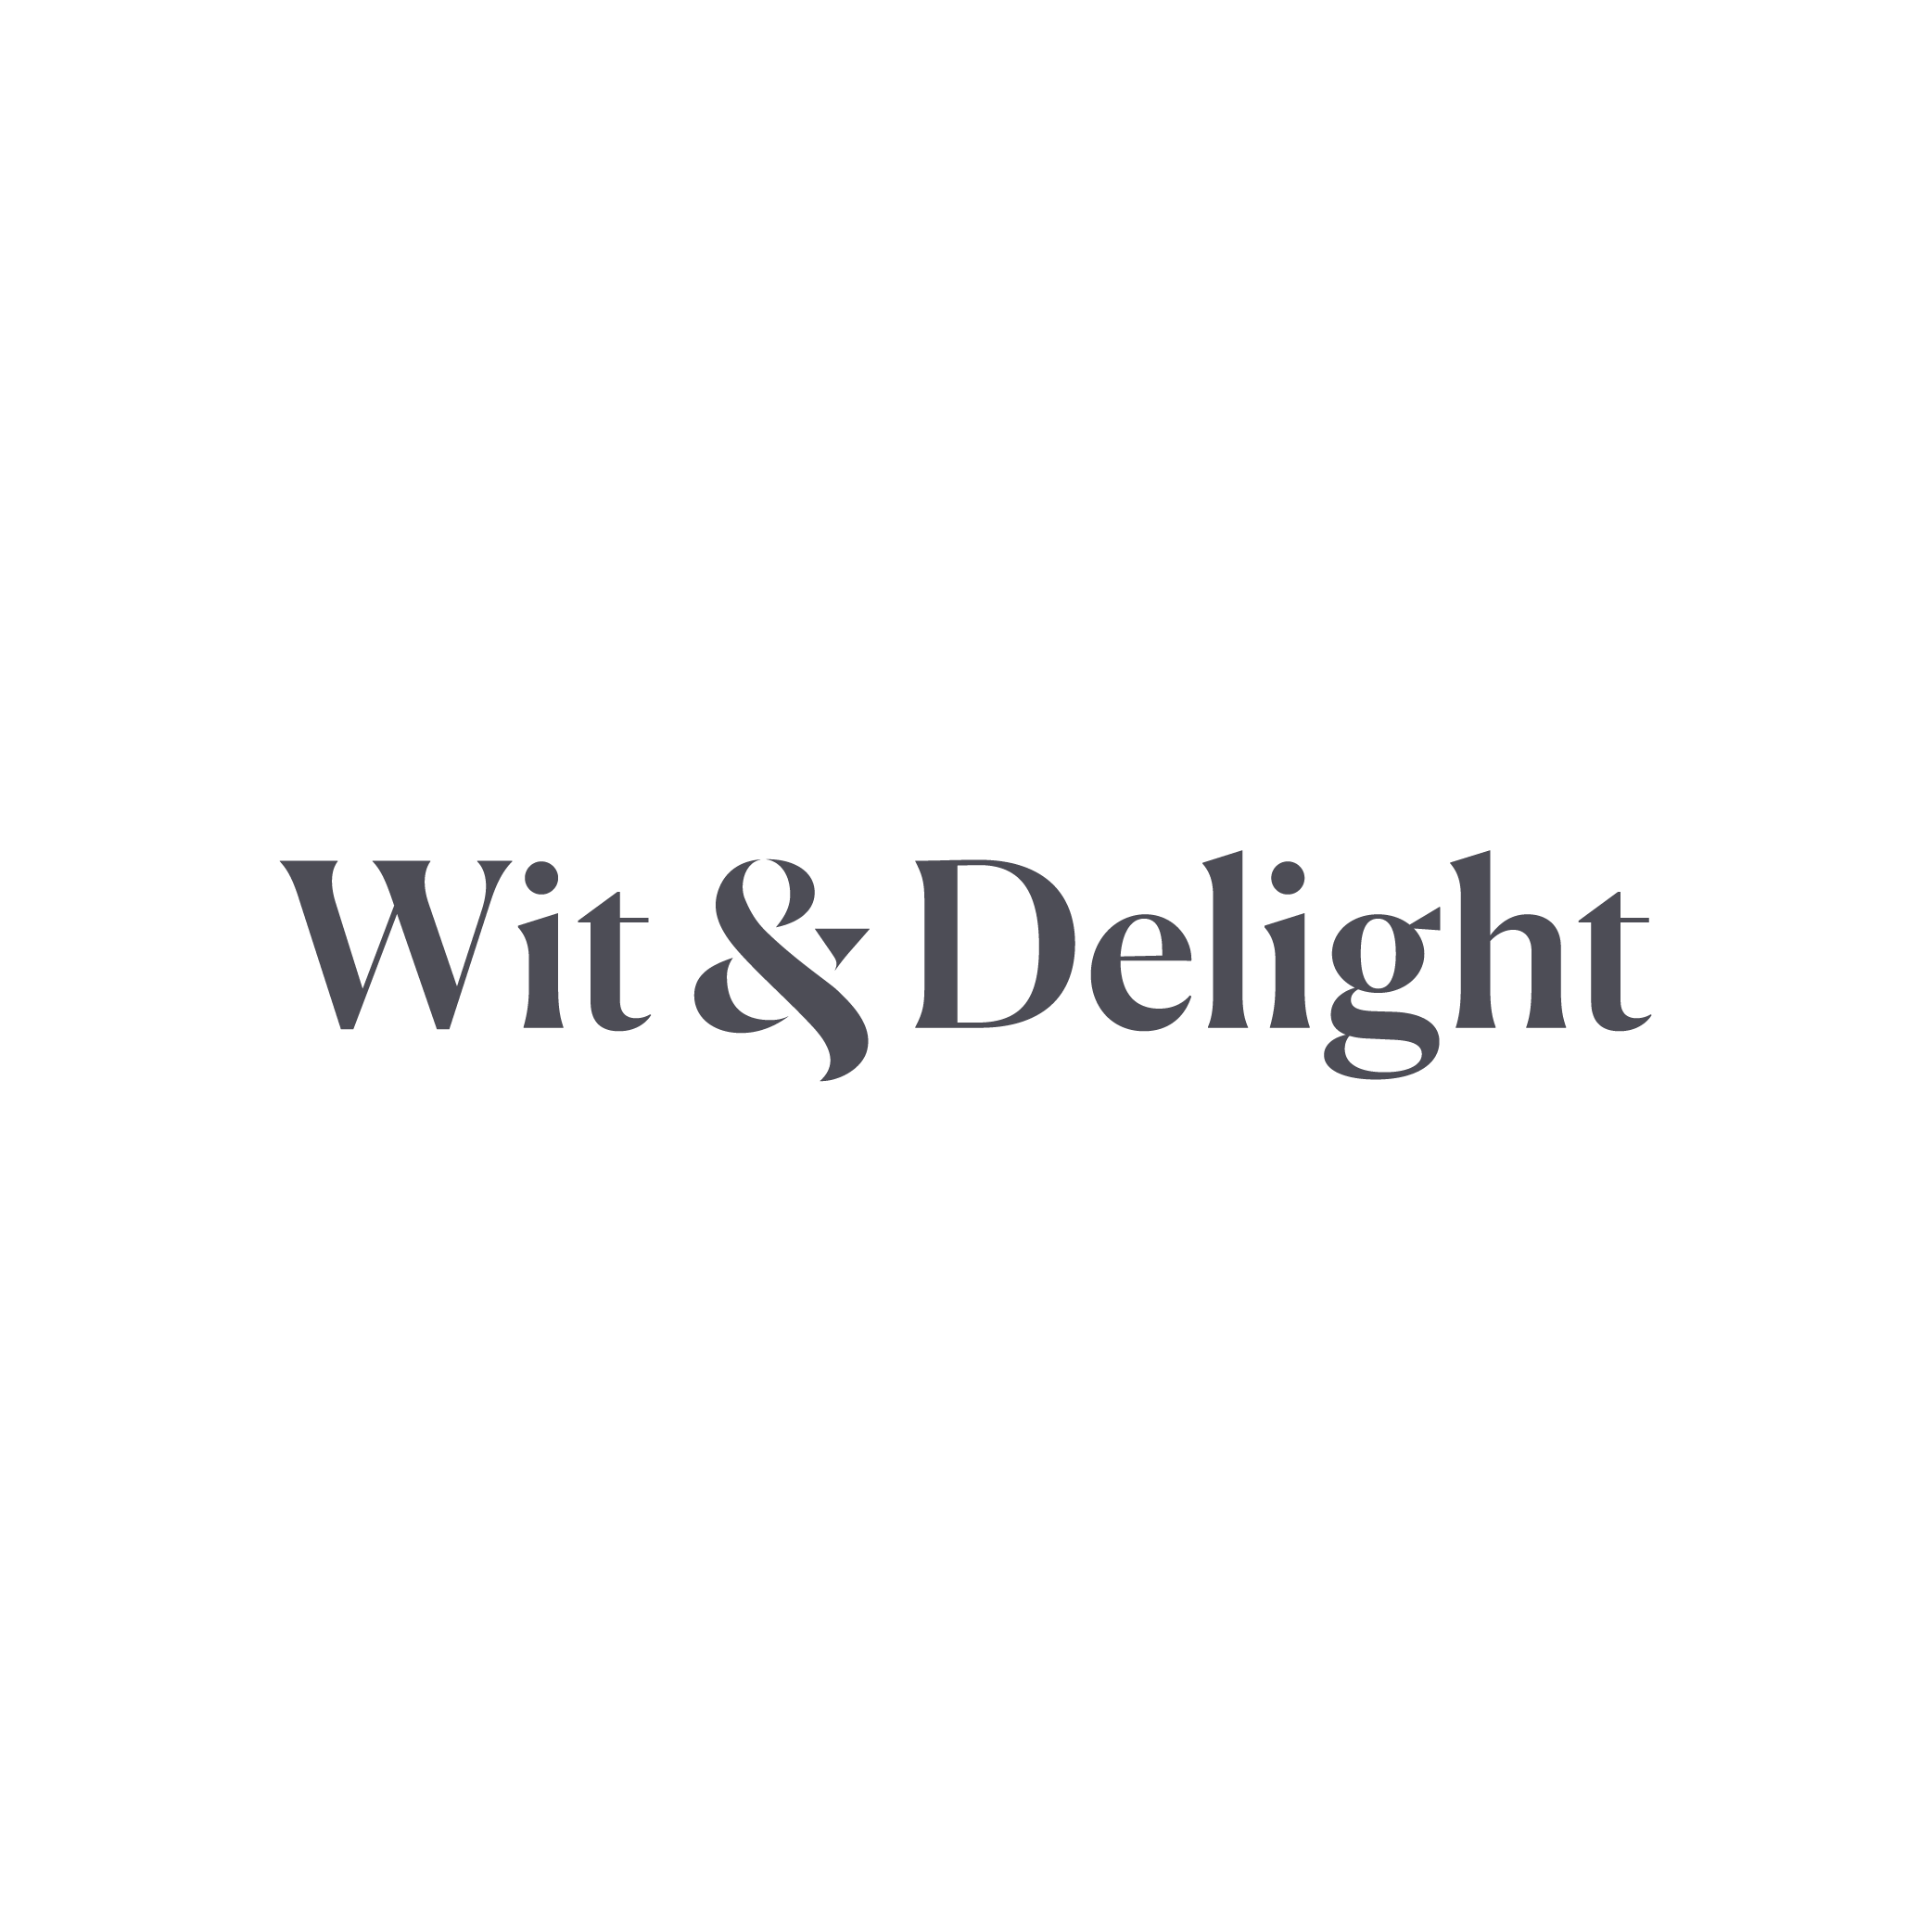 Wit & Delight logo.png